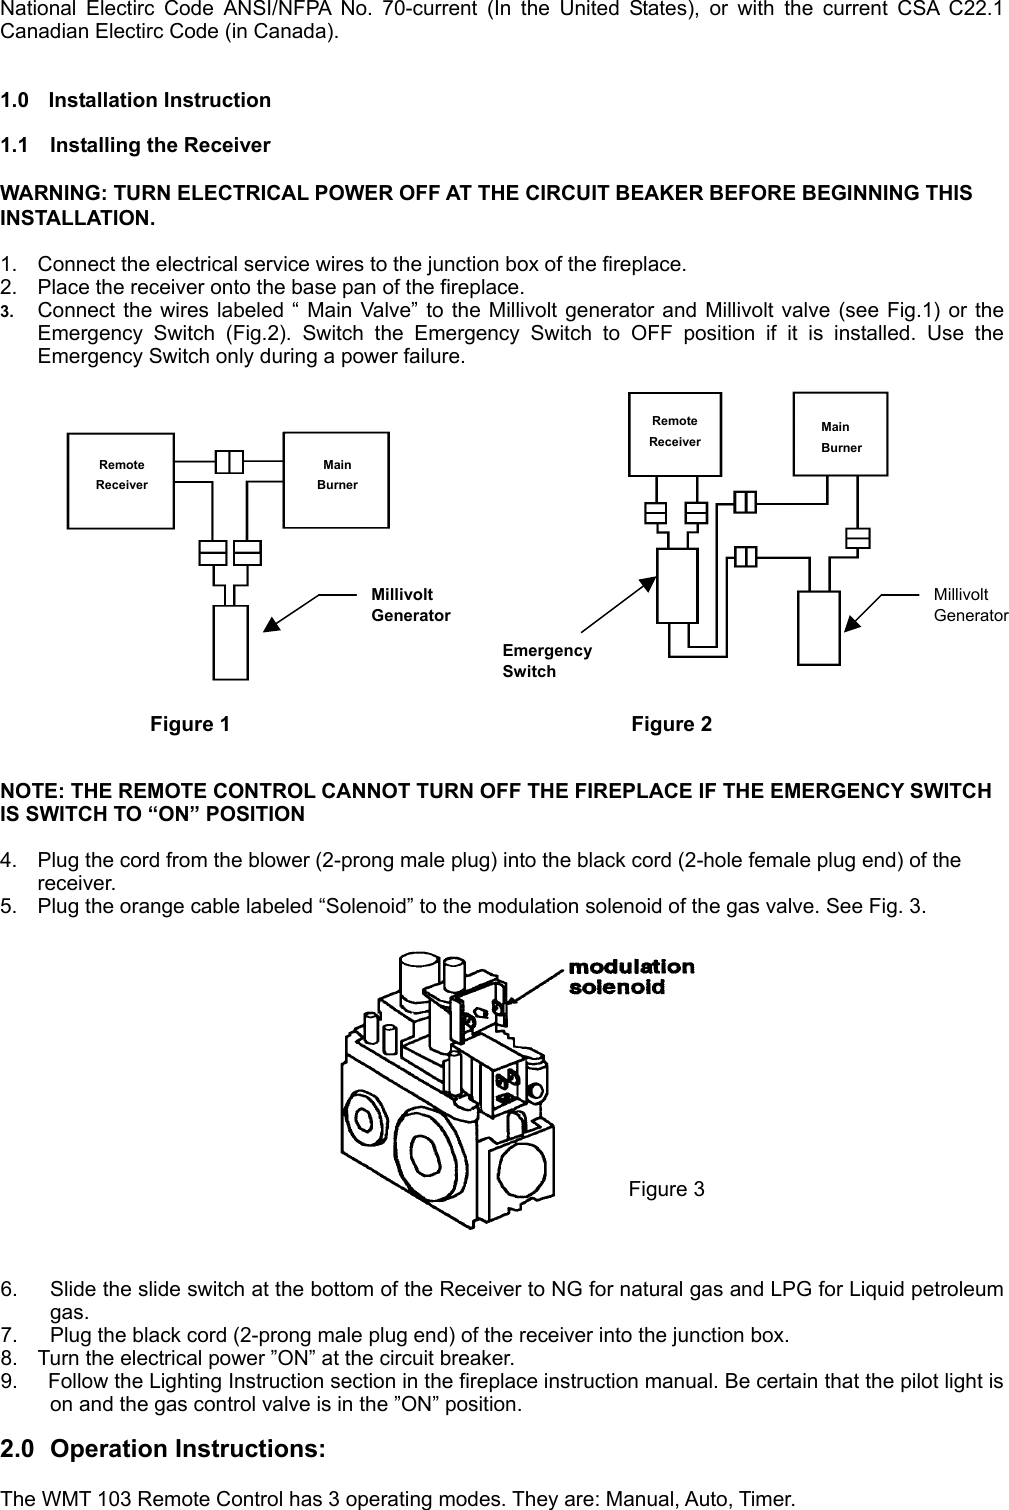 National Electirc Code ANSI/NFPA No. 70-current (In the United States), or with the current CSA C22.1 Canadian Electirc Code (in Canada).     1.0 Installation Instruction  1.1  Installing the Receiver  WARNING: TURN ELECTRICAL POWER OFF AT THE CIRCUIT BEAKER BEFORE BEGINNING THIS INSTALLATION.  1.  Connect the electrical service wires to the junction box of the fireplace. 2.  Place the receiver onto the base pan of the fireplace. 3.  Connect the wires labeled “ Main Valve” to the Millivolt generator and Millivolt valve (see Fig.1) or the Emergency Switch (Fig.2). Switch the Emergency Switch to OFF position if it is installed. Use the Emergency Switch only during a power failure.  Remote Receiver Main Burner Remote Receiver Main Burner Millivolt GeneratorMillivolt GeneratorEmergency Switch Figure 1           Figure 2  NOTE: THE REMOTE CONTROL CANNOT TURN OFF THE FIREPLACE IF THE EMERGENCY SWITCH IS SWITCH TO “ON” POSITION  4.  Plug the cord from the blower (2-prong male plug) into the black cord (2-hole female plug end) of the receiver. 5.  Plug the orange cable labeled “Solenoid” to the modulation solenoid of the gas valve. See Fig. 3.   Figure 3  6.  Slide the slide switch at the bottom of the Receiver to NG for natural gas and LPG for Liquid petroleum gas. 7.  Plug the black cord (2-prong male plug end) of the receiver into the junction box. 8.  Turn the electrical power ”ON” at the circuit breaker. 9.    Follow the Lighting Instruction section in the fireplace instruction manual. Be certain that the pilot light is on and the gas control valve is in the ”ON” position.  2.0 Operation Instructions:  The WMT 103 Remote Control has 3 operating modes. They are: Manual, Auto, Timer. 